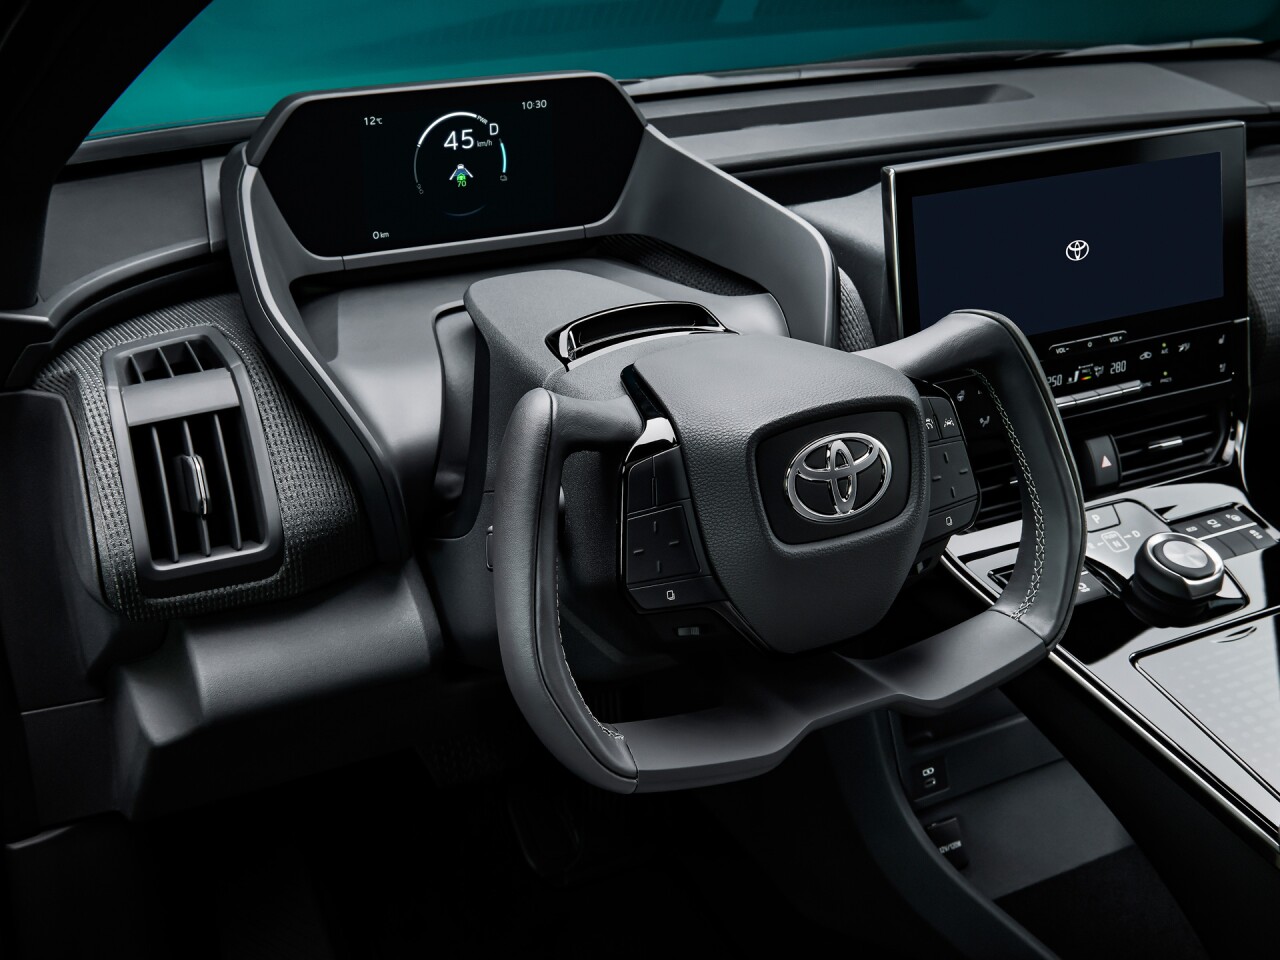 Toyota bZ4X models with the optional steer-by-wire system will feature a unique steering wheel